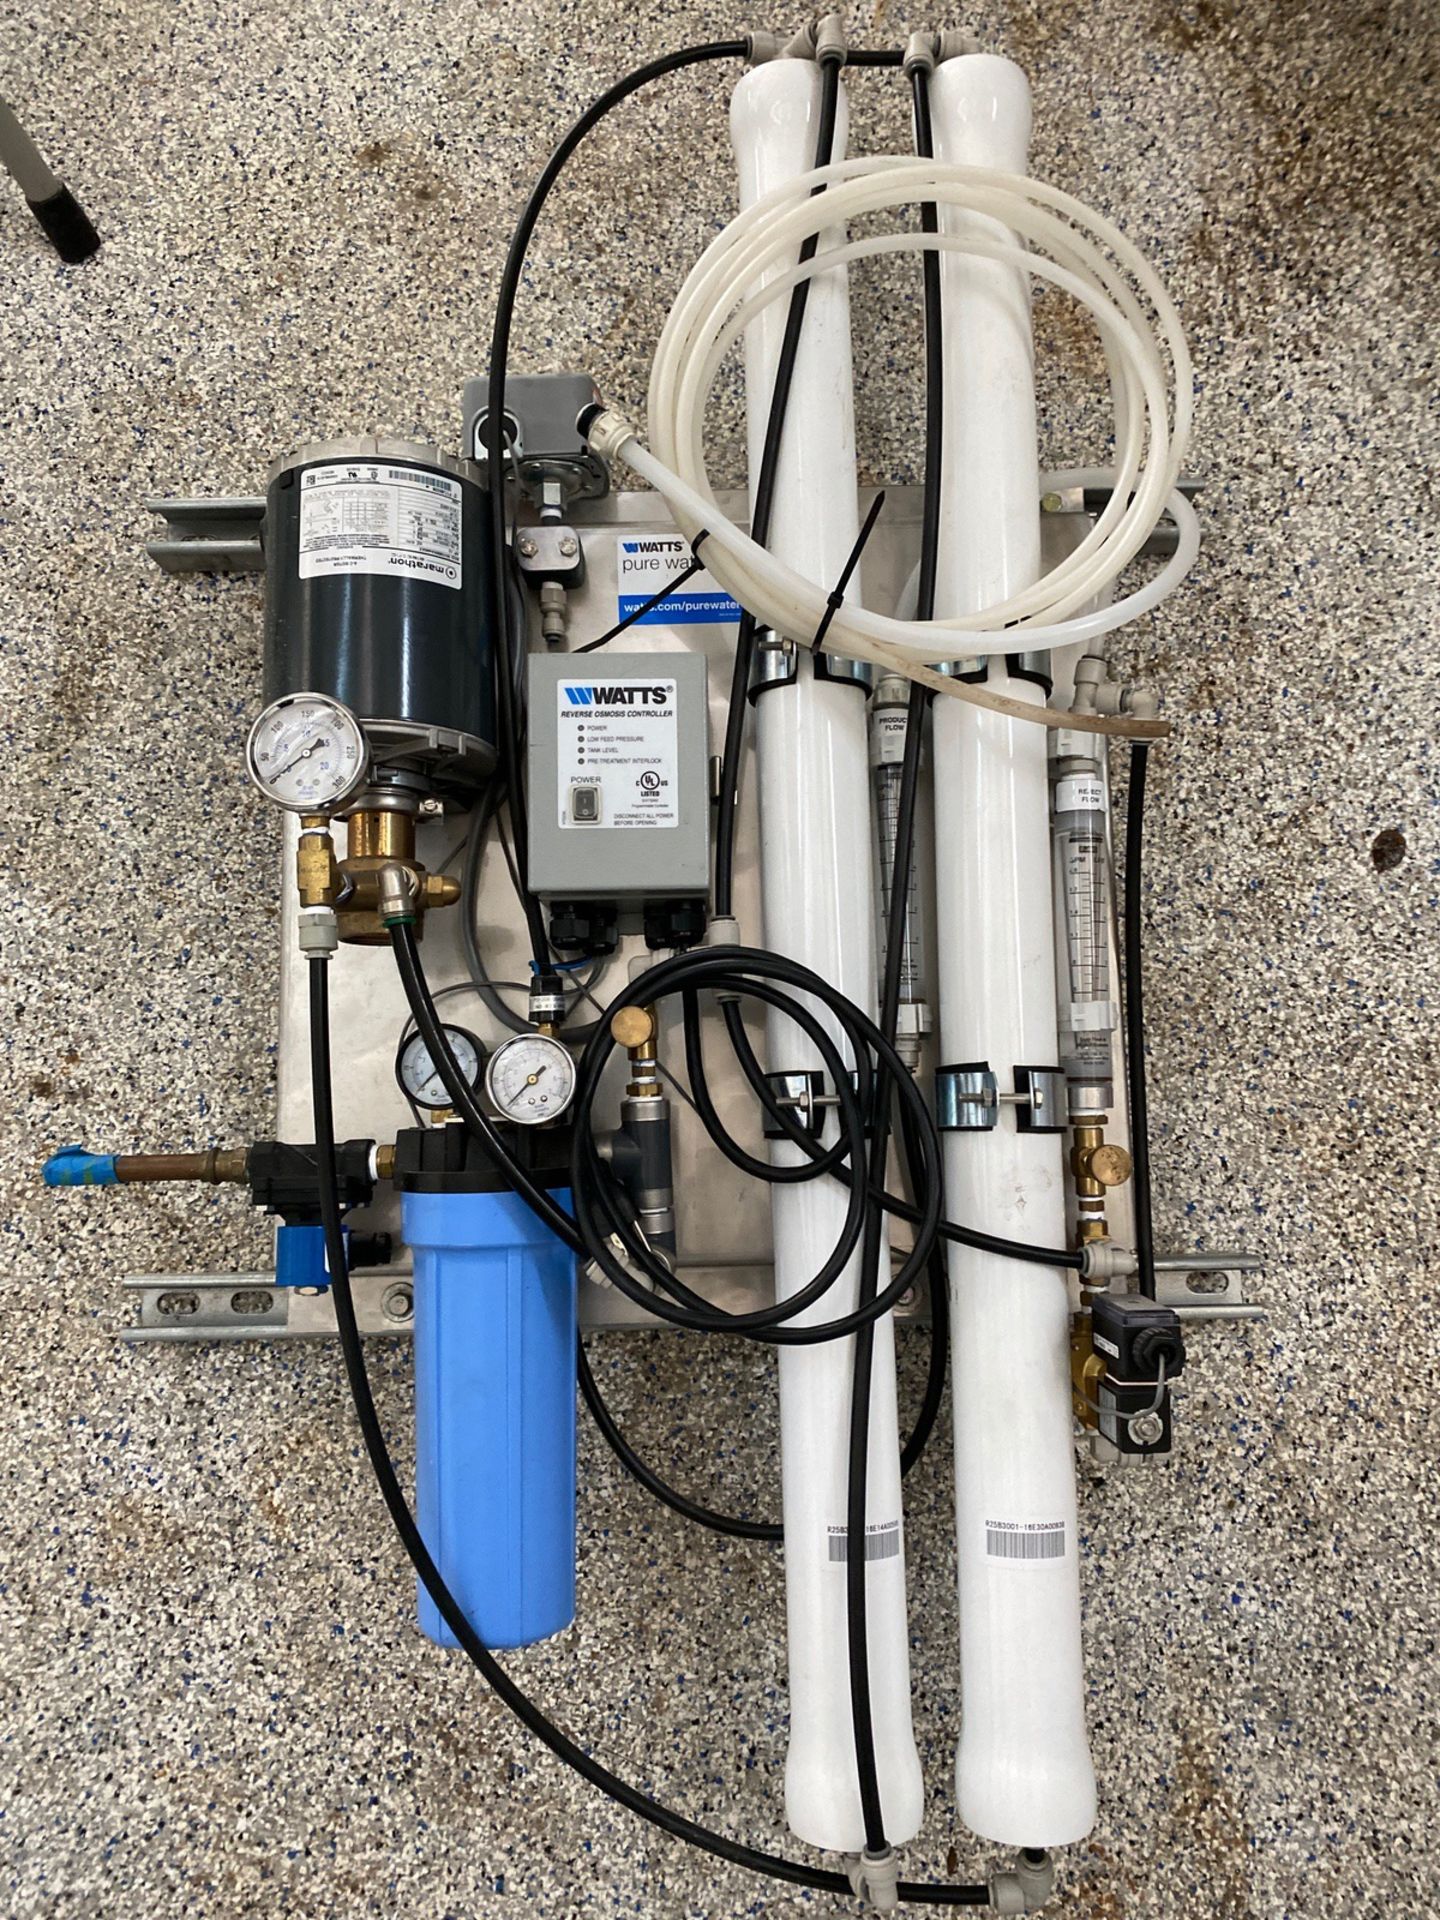 Reverse Osmosis Water Filter System with Water Softener [Subj to Bulk] | Rig Fee: $50 - Image 2 of 2